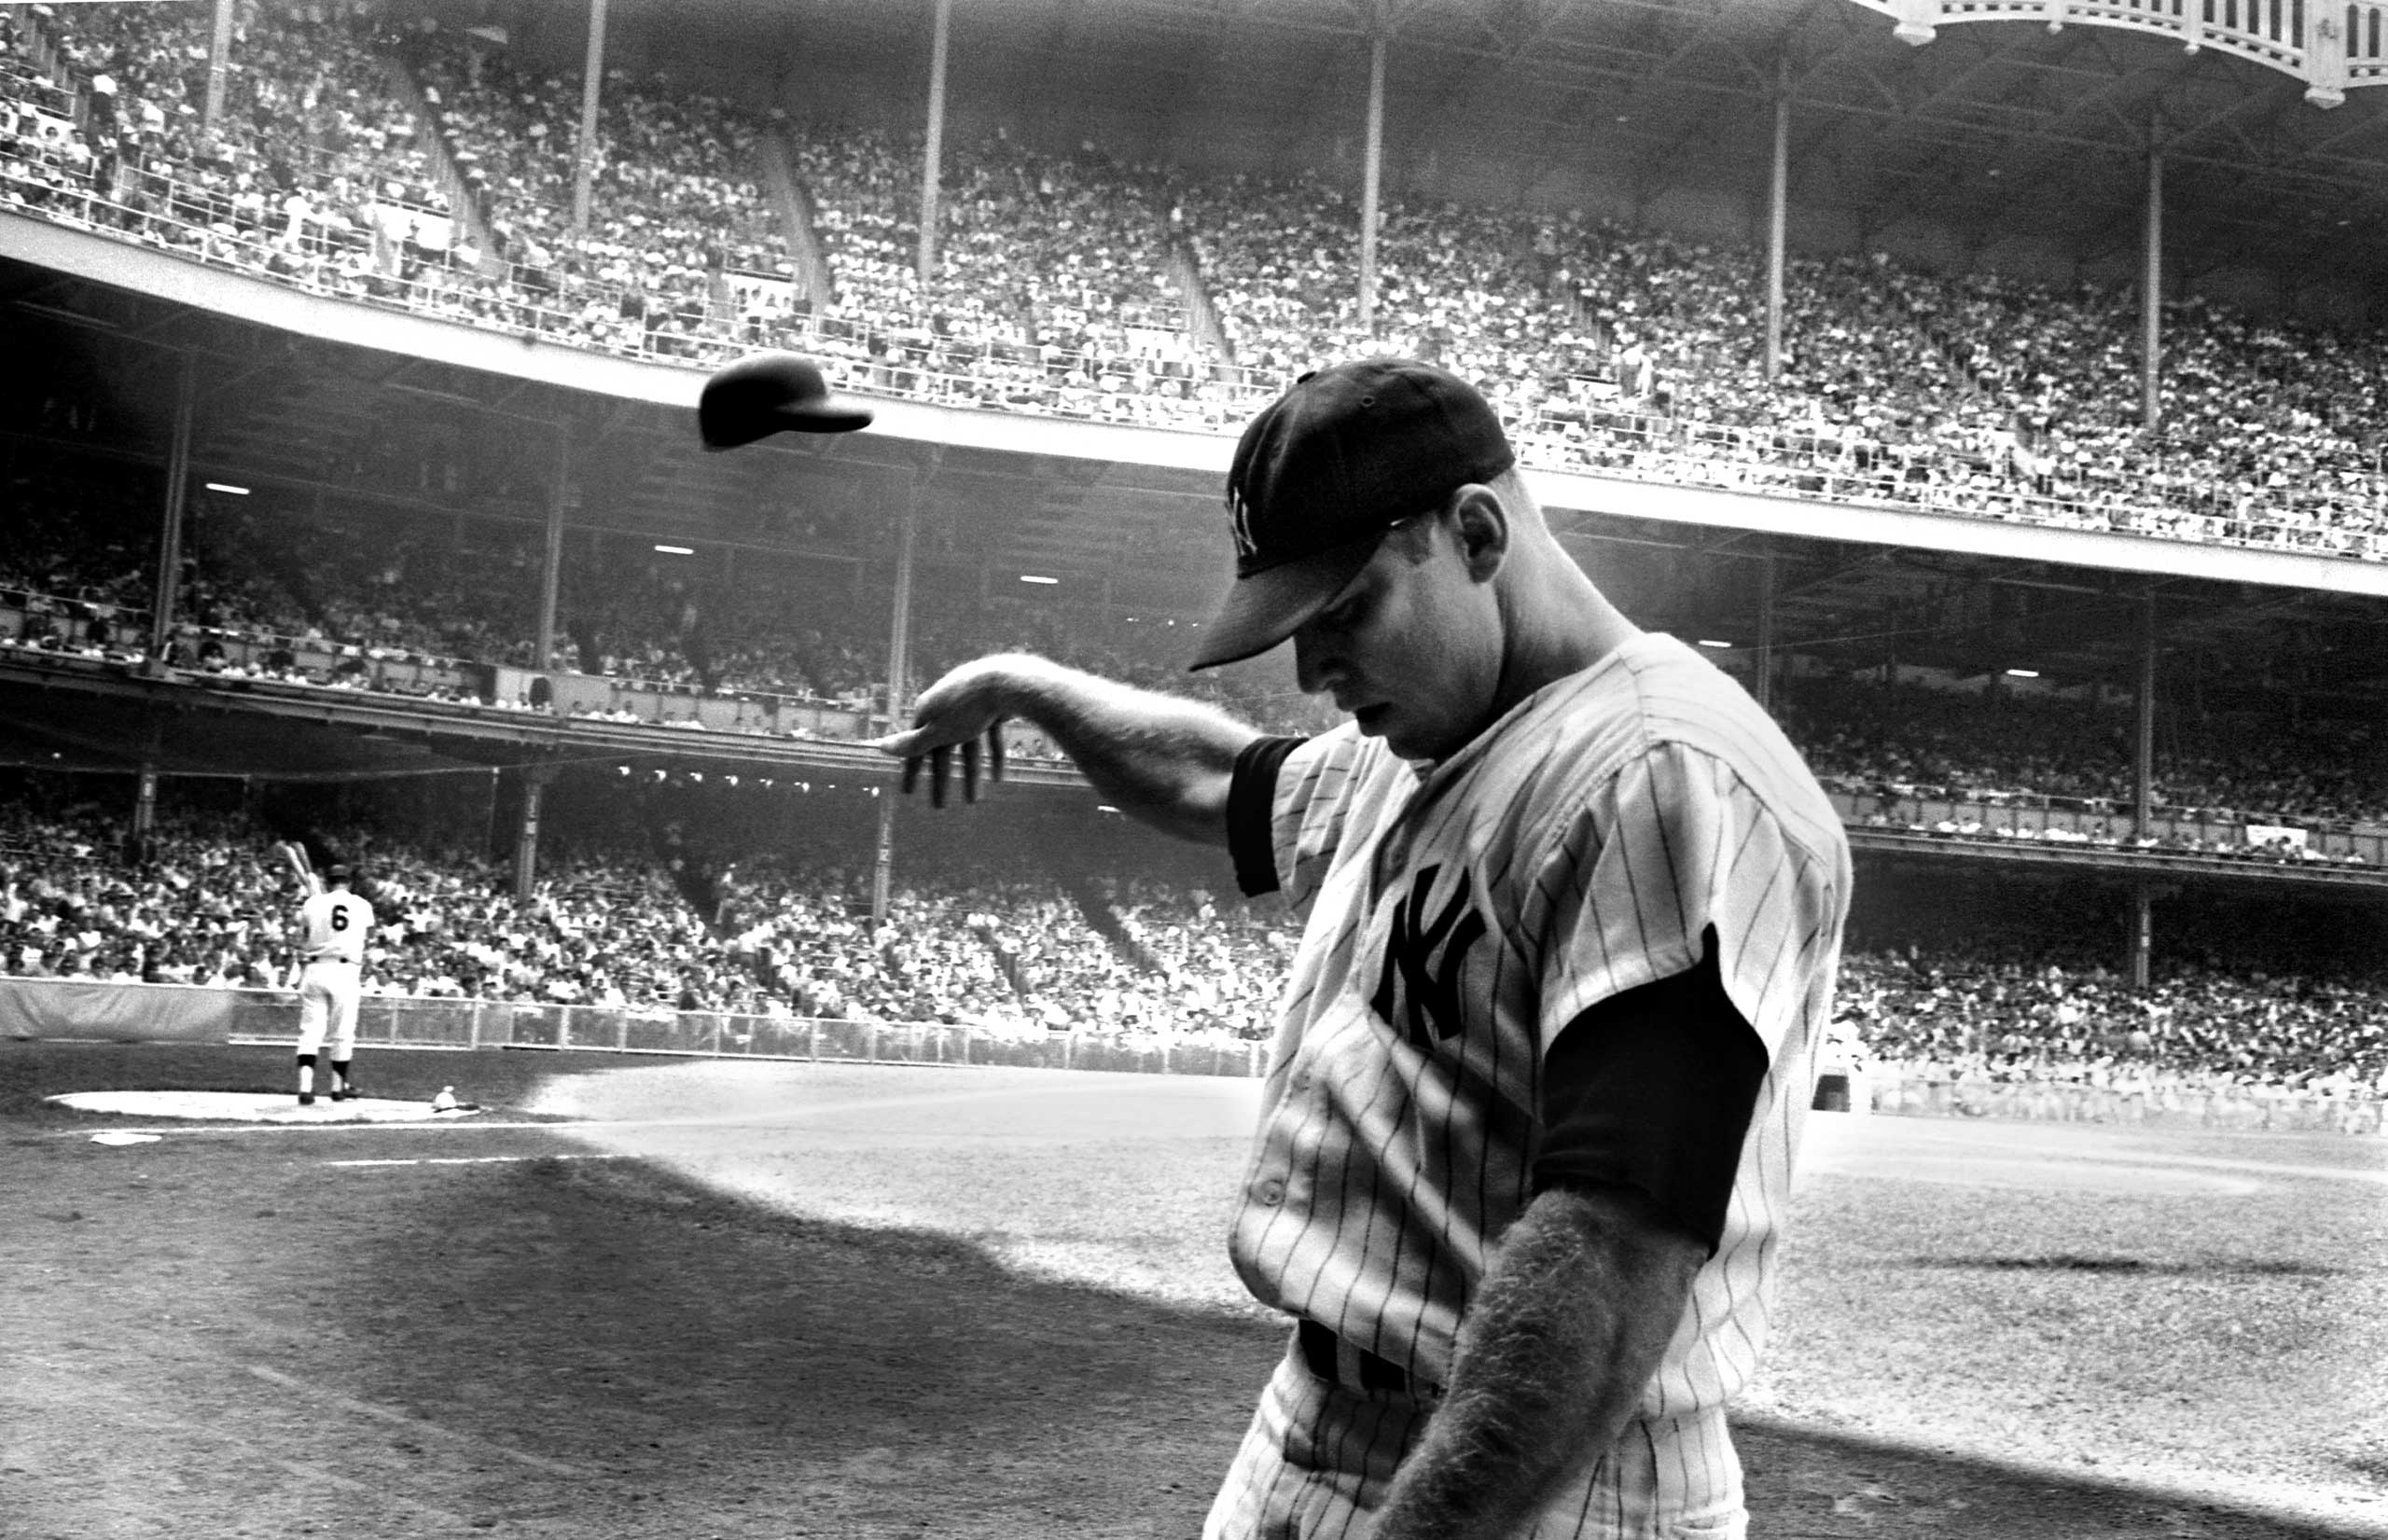 1965 | In one of the most eloquent photographs ever made of a great athlete in decline, Yankee star Mickey Mantle flings his batting helmet away in disgust after another terrible at-bat near the end of his storied, injury-plagued career. Originally published in the July 30, 1965, issue of LIFE.